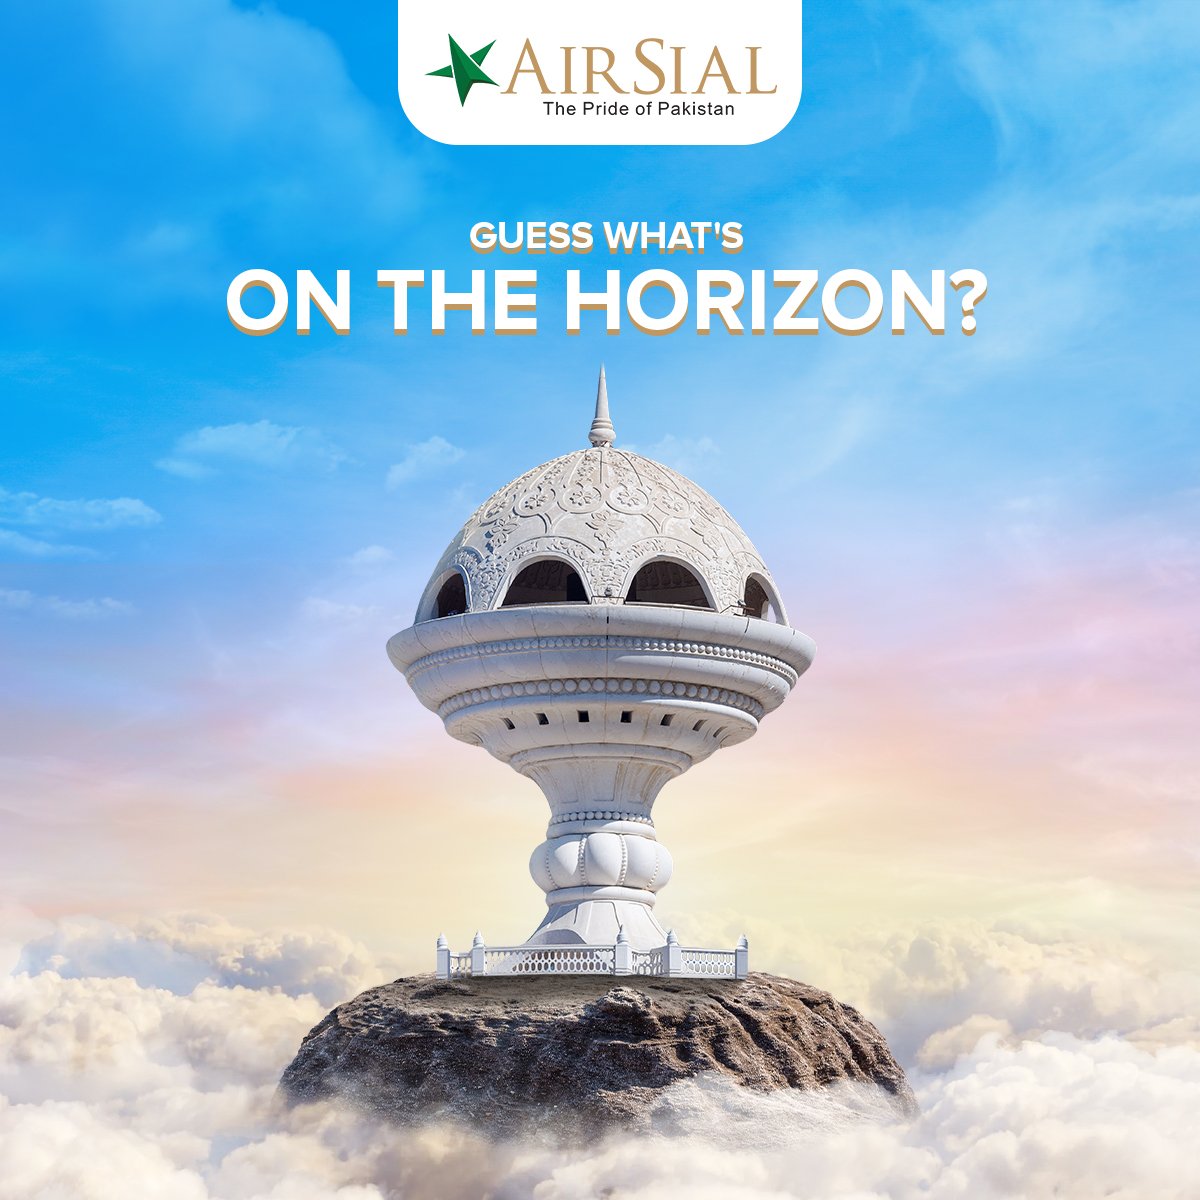 AirSial indicates plan to start flights for Muscat (Oman).

historyofpia.com/forums/viewtop…